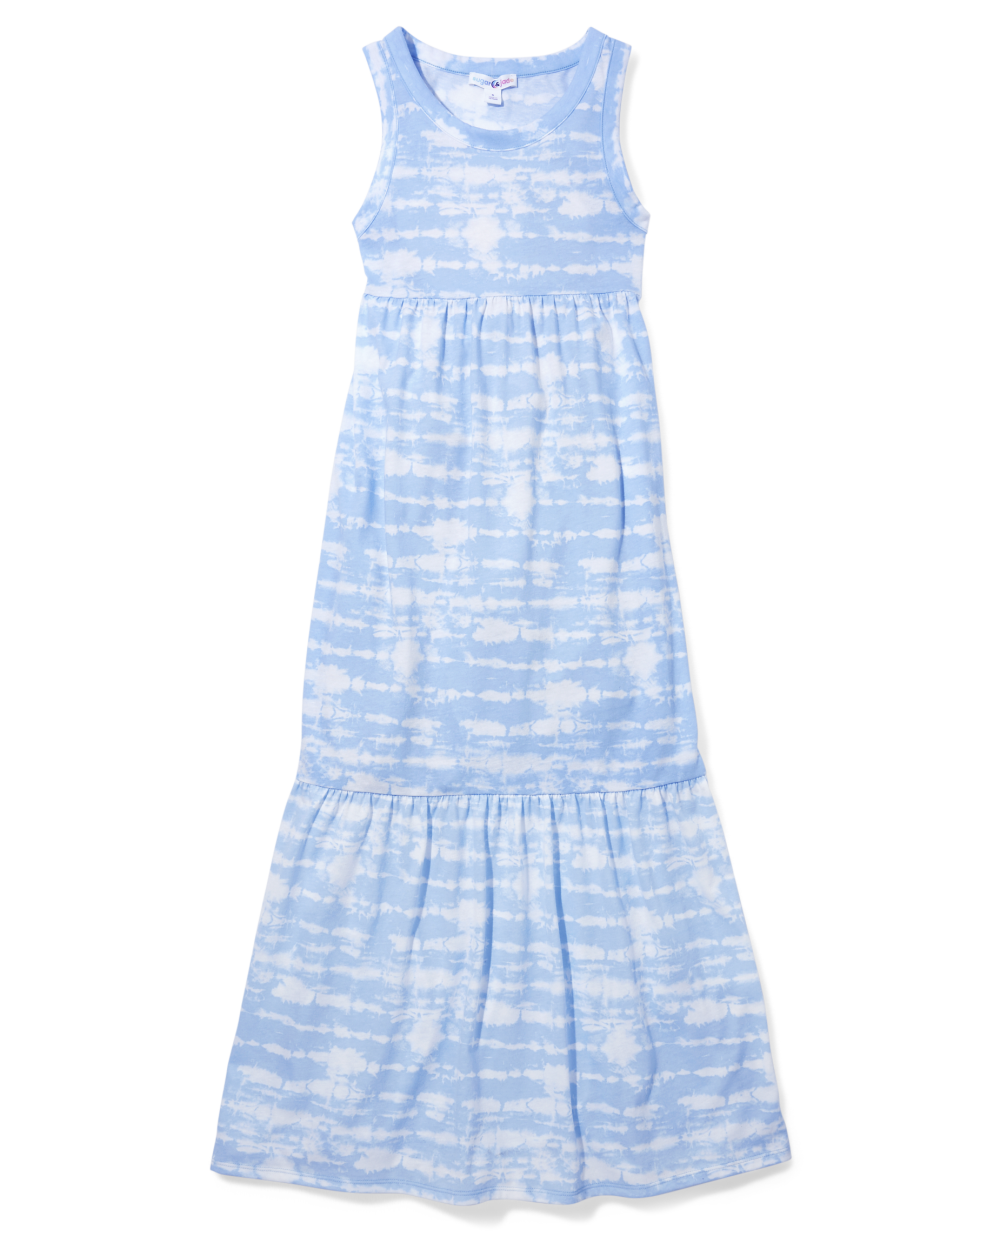 Girls Ruched Sleeveless Tank Below the Knee Round Neck Tie Dye Print Maxi Dress With Ruffles